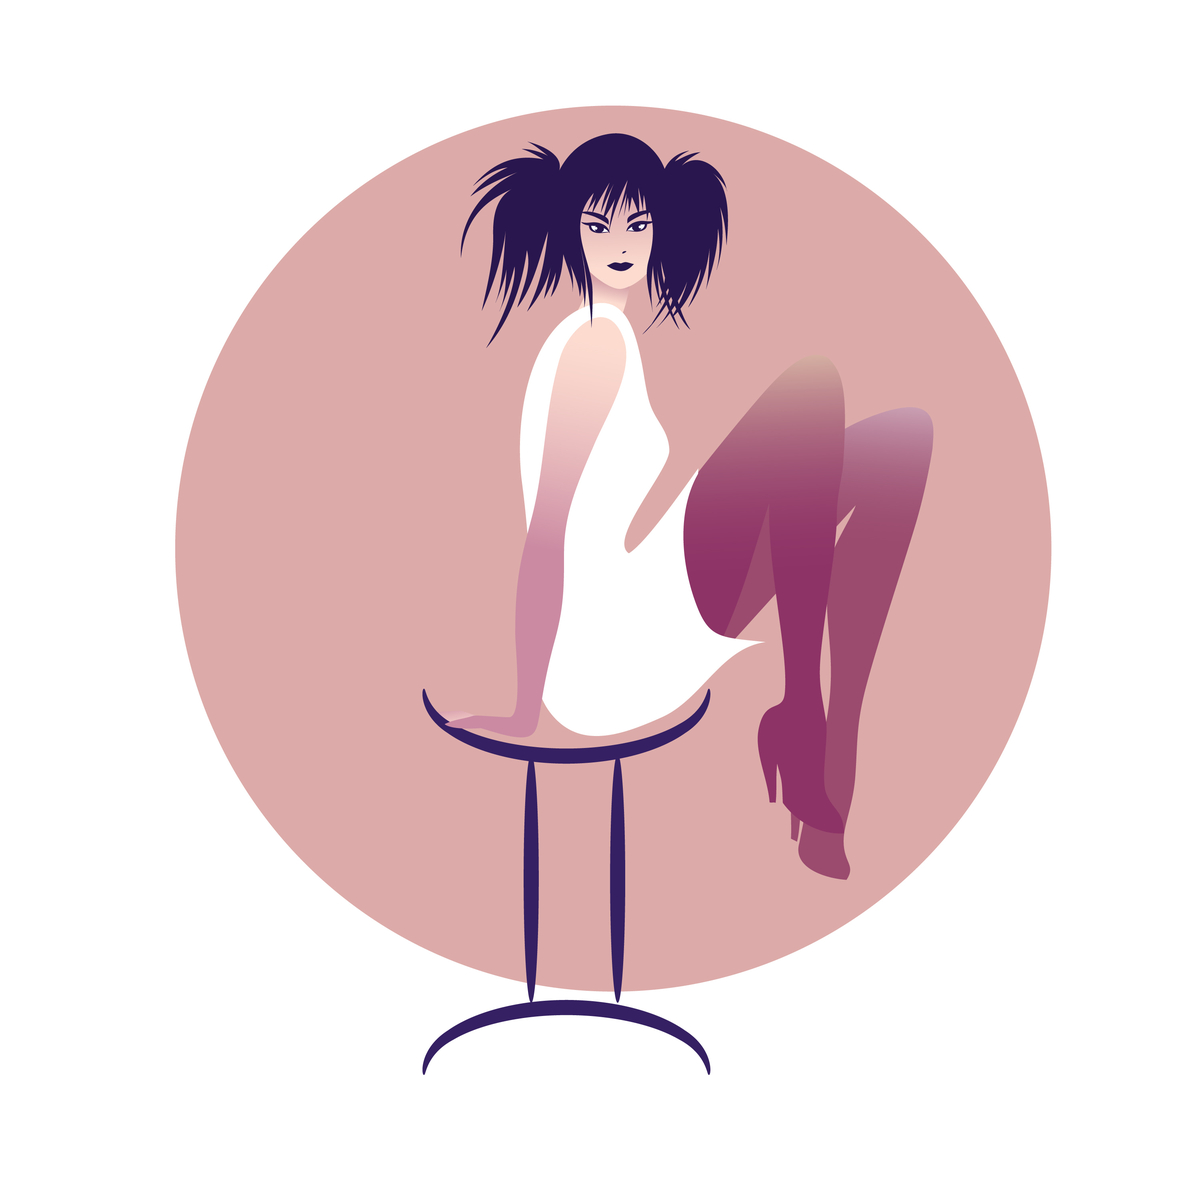 Woman with white dress, pink stockings and pigtails sitting on the Gemini Zodiac Sign.